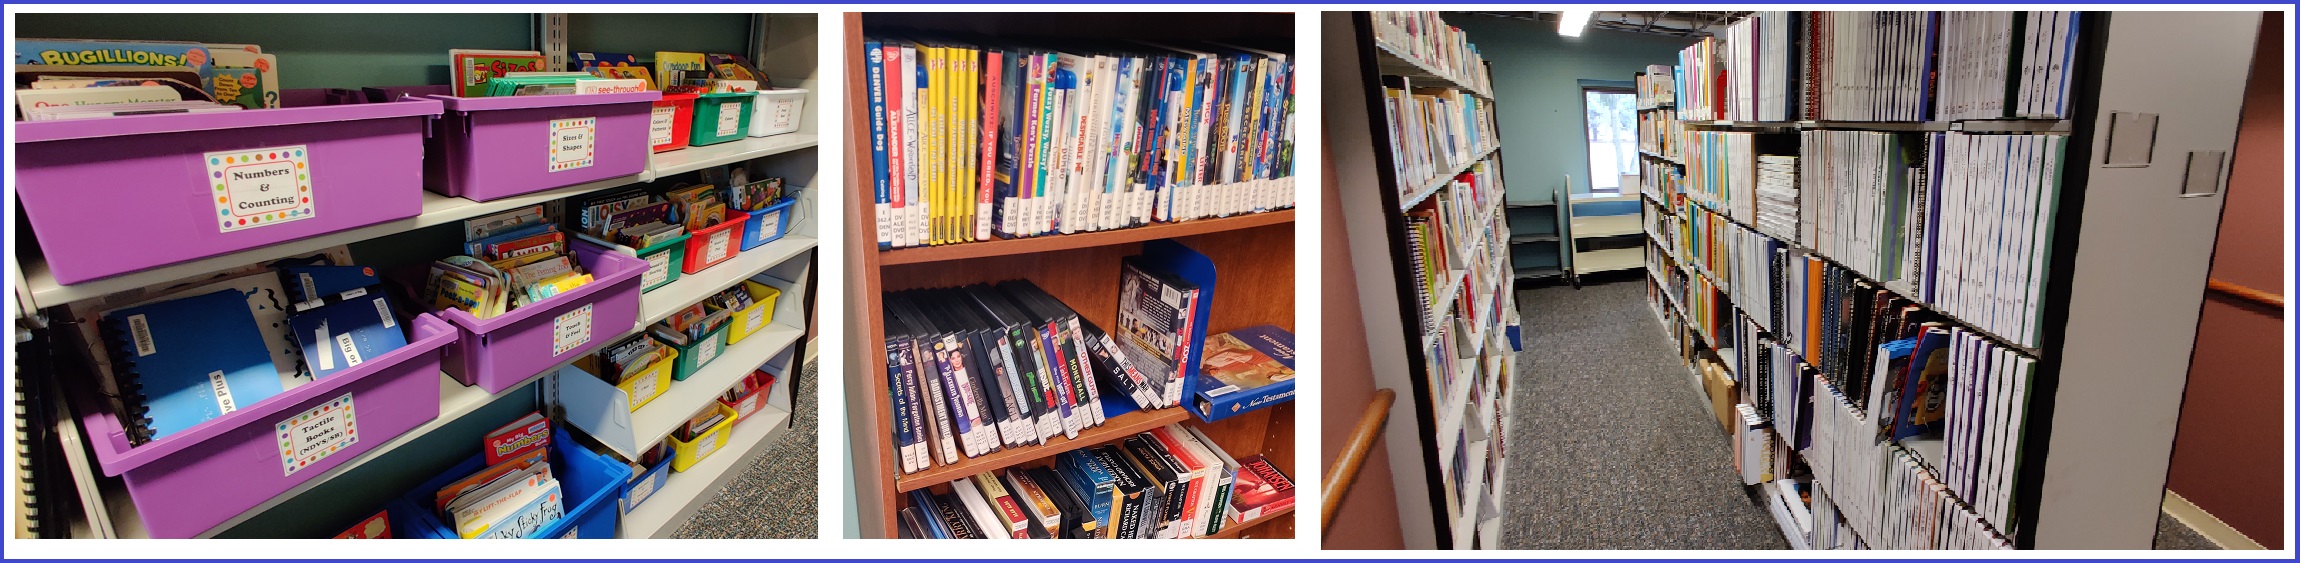 3 Images The first is shelving of kids books.  Second is rows of Audio Books and Descriptive DVD's and the Third is Rows of Braille Books in the library. 